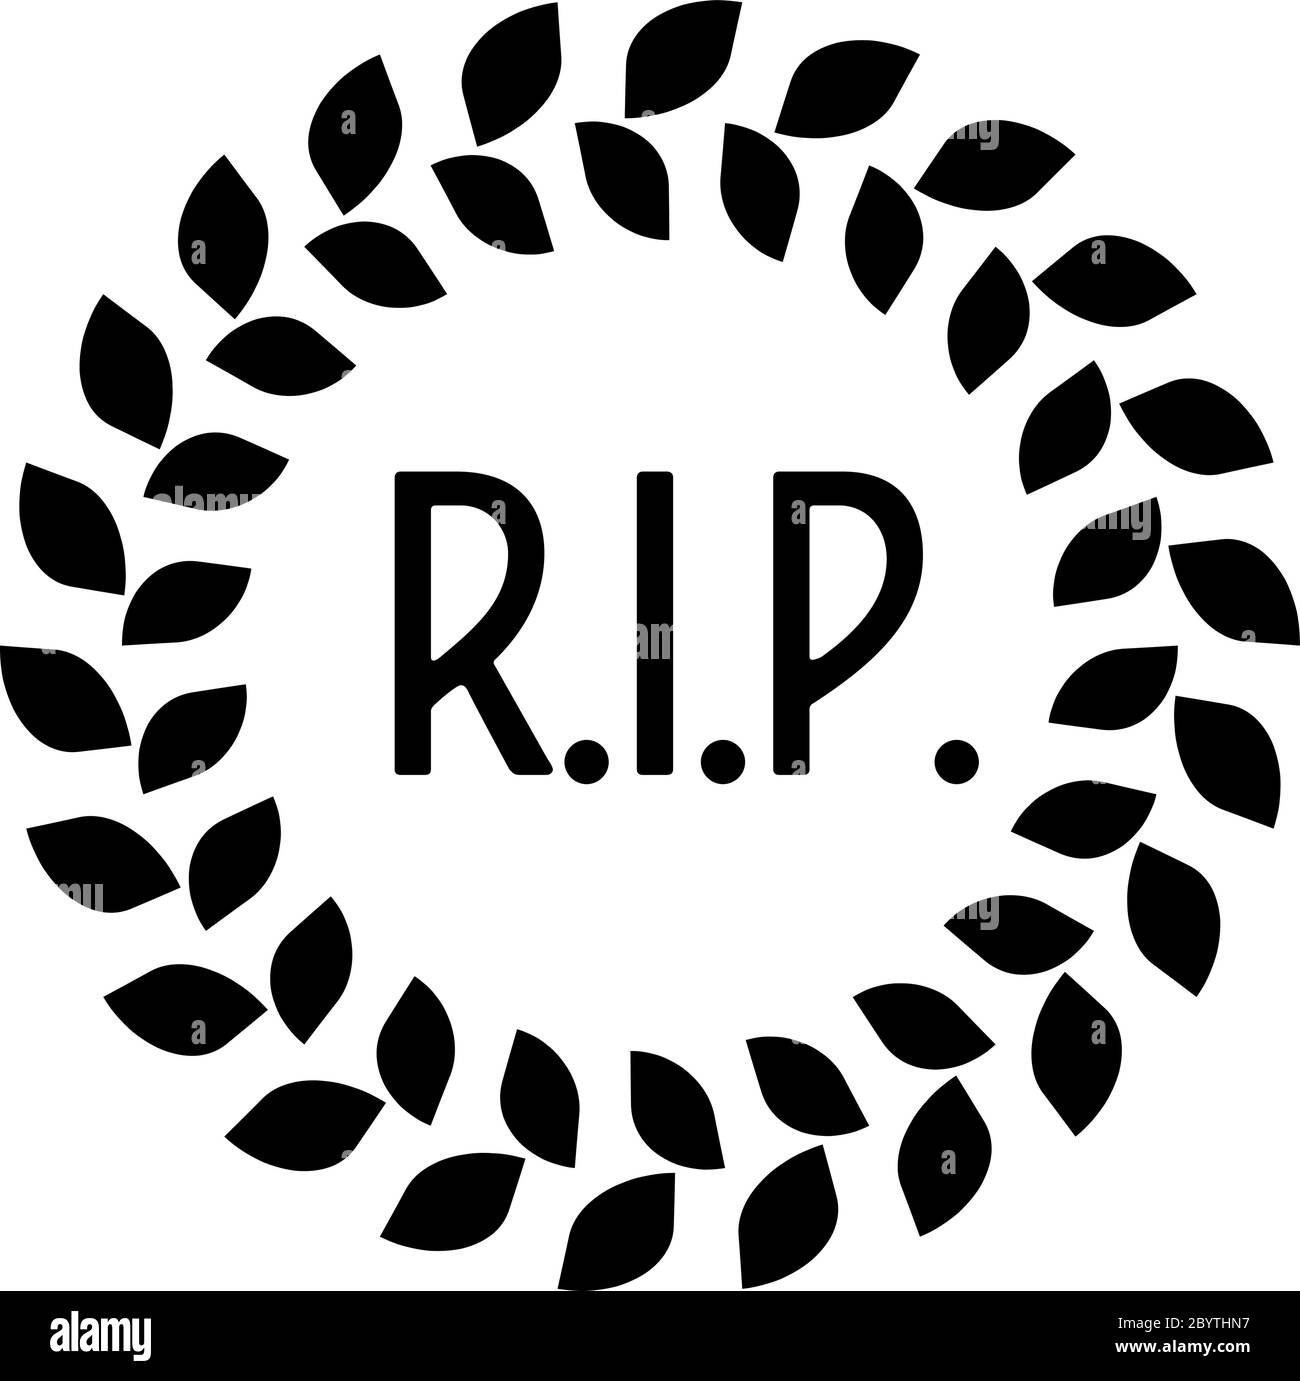 Funeral wreath with R.I.P. label. Rest in peace. Simple flat black ...